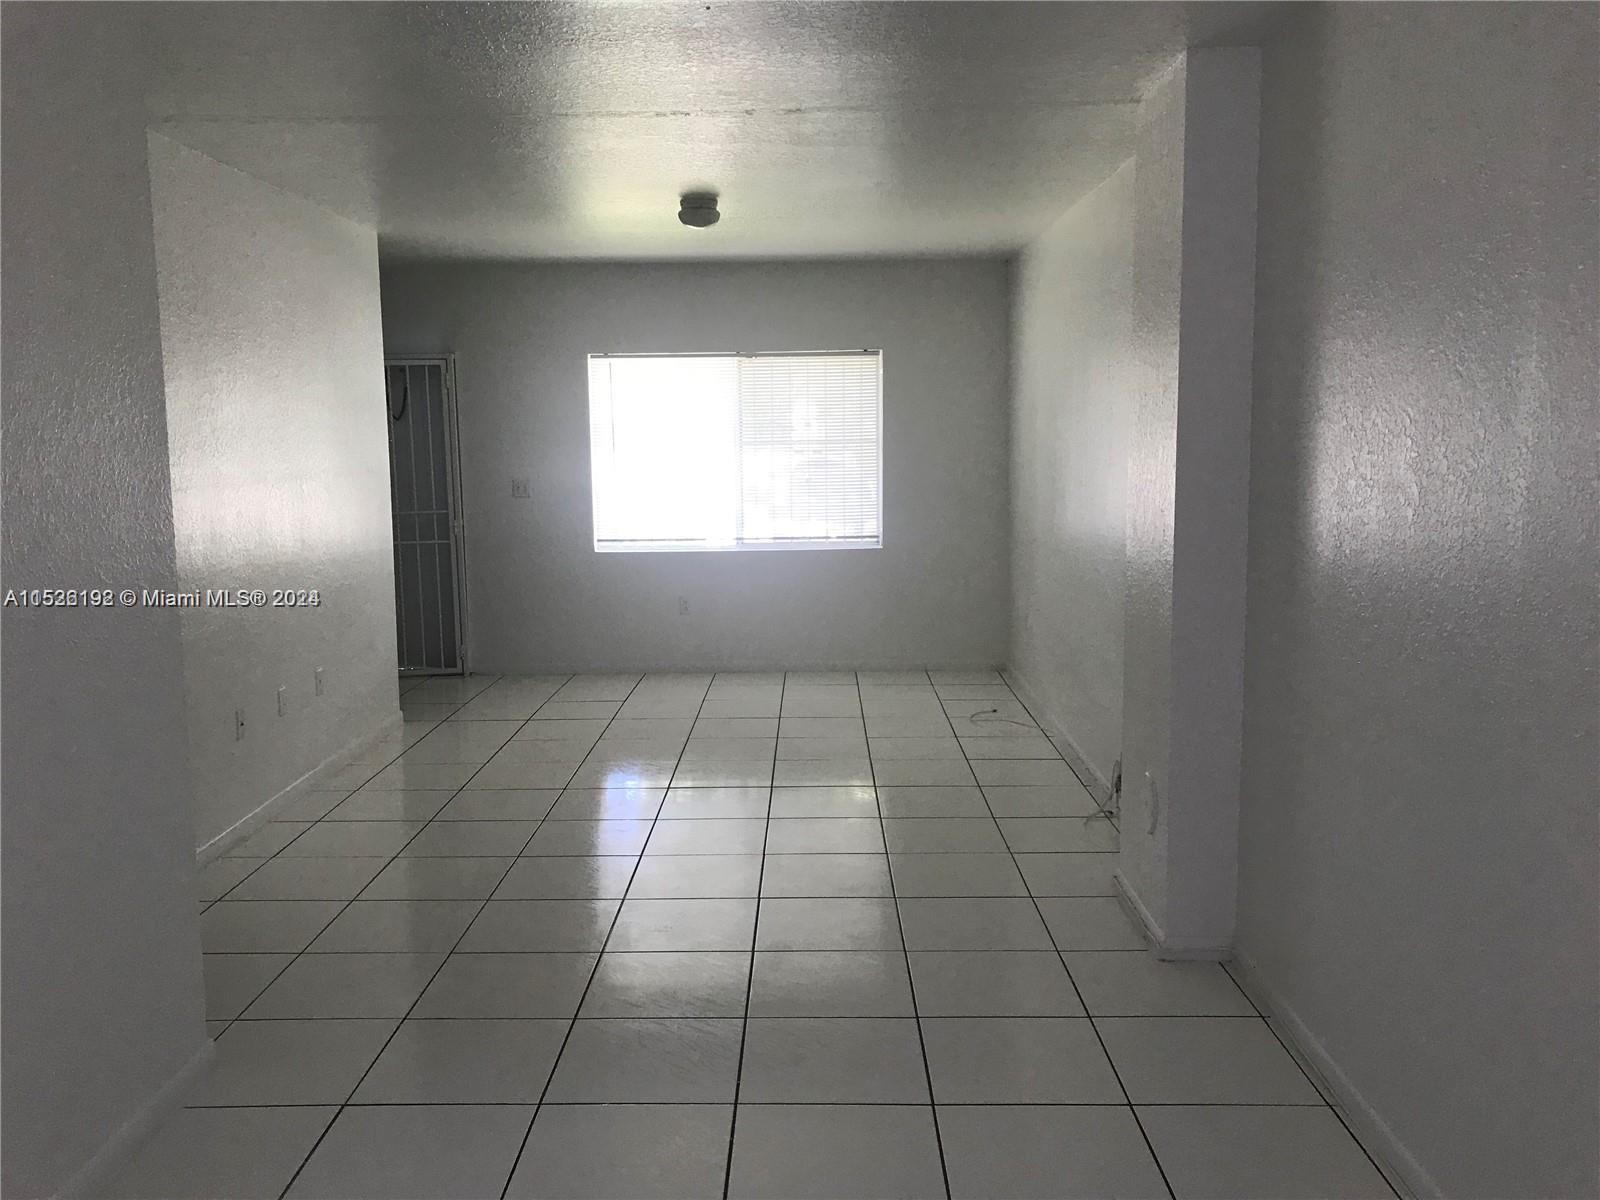 an empty room with white walls and tiles